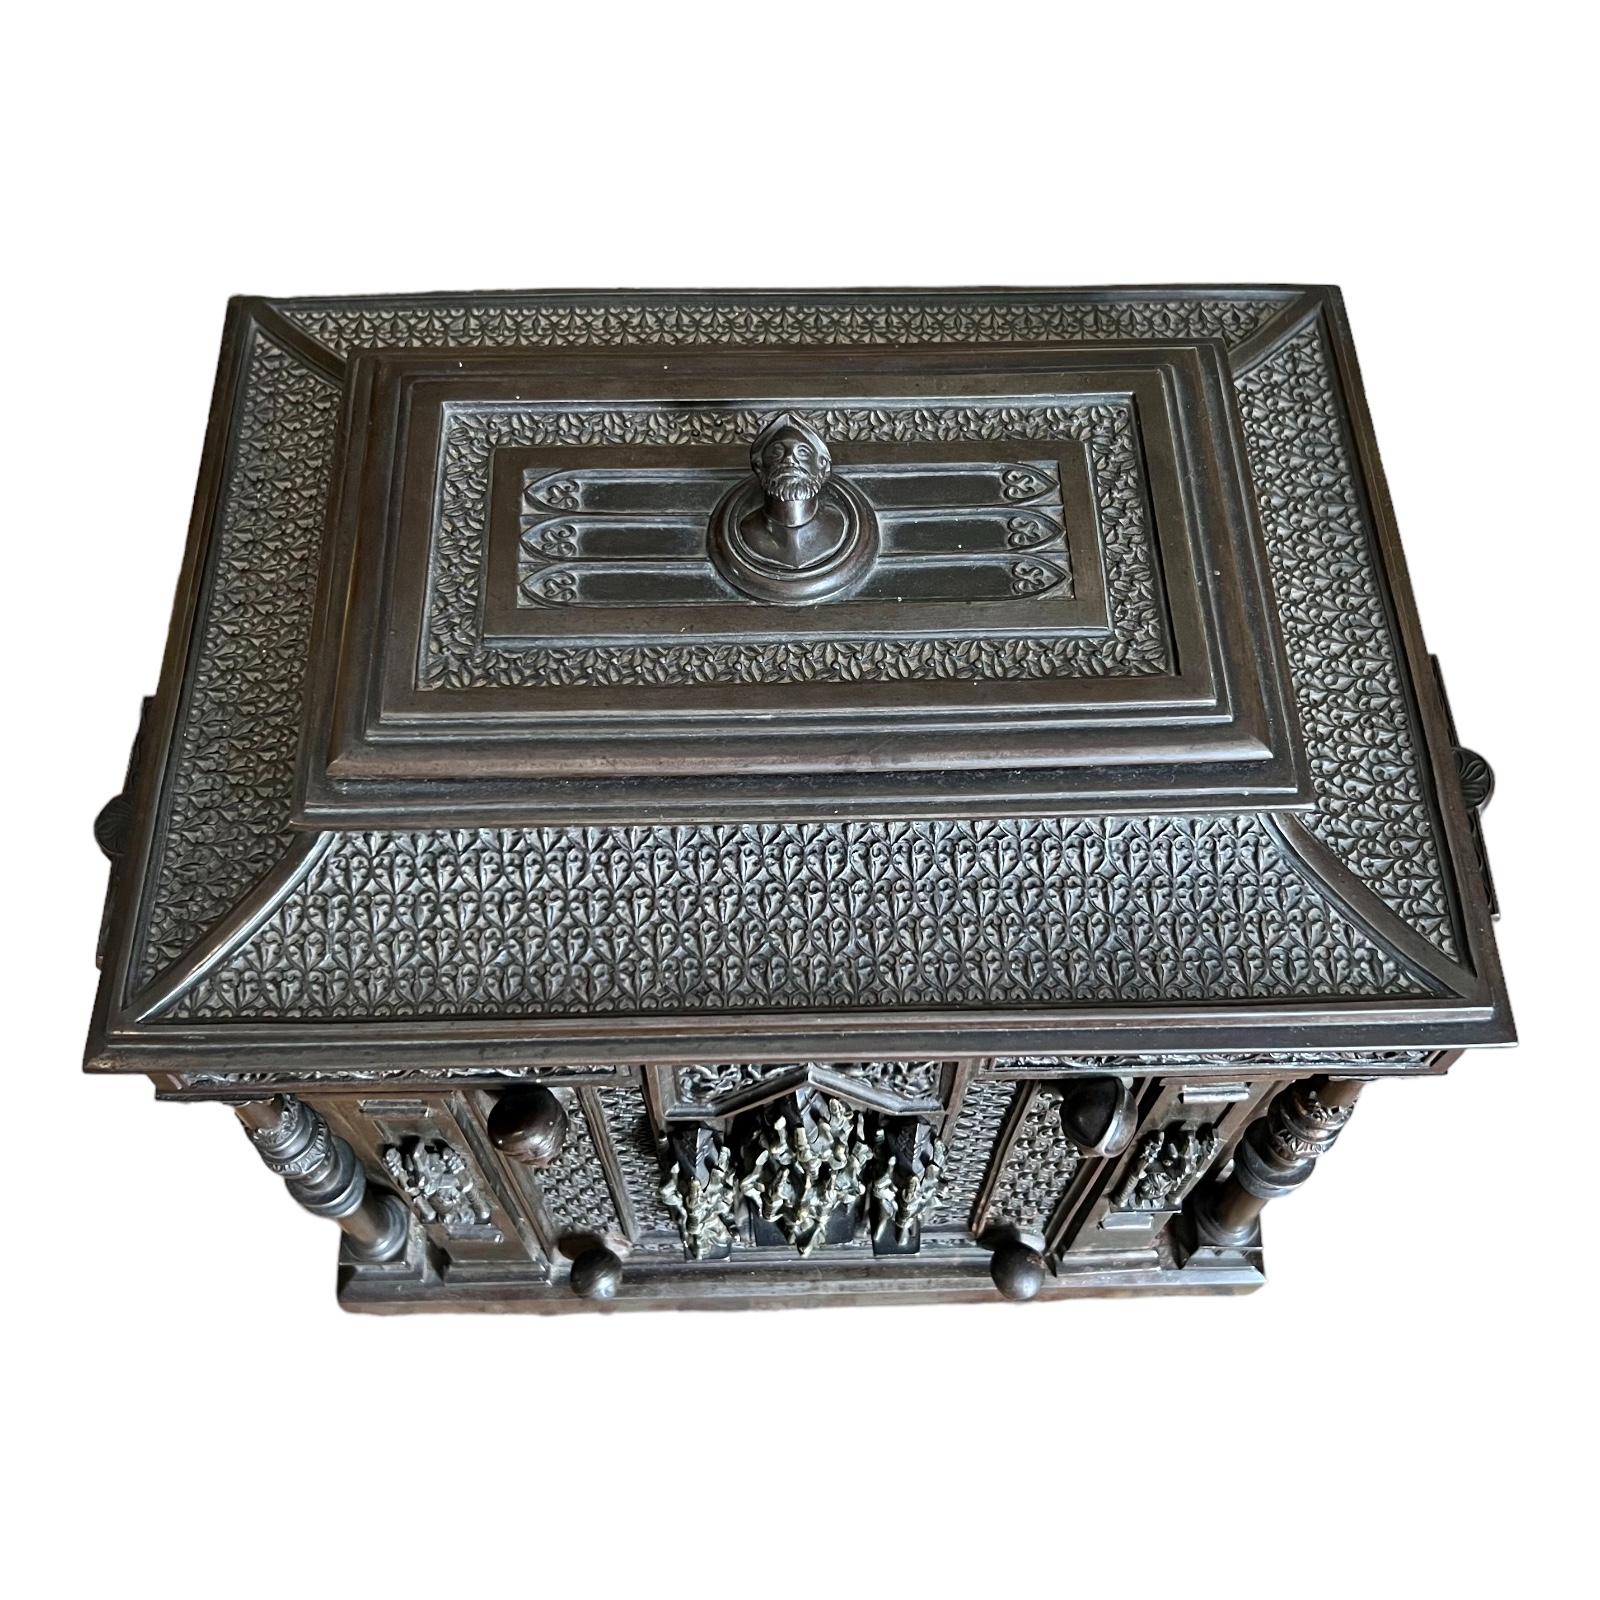 We present you with a large jewellry chest  crafted in bronze with medal patina in the neo-gothic style and hailing from the Napoleon II period. It boasts practical dimensions (34cm x 35cm) and intricate ornamentation. Its entrance is concealed by a